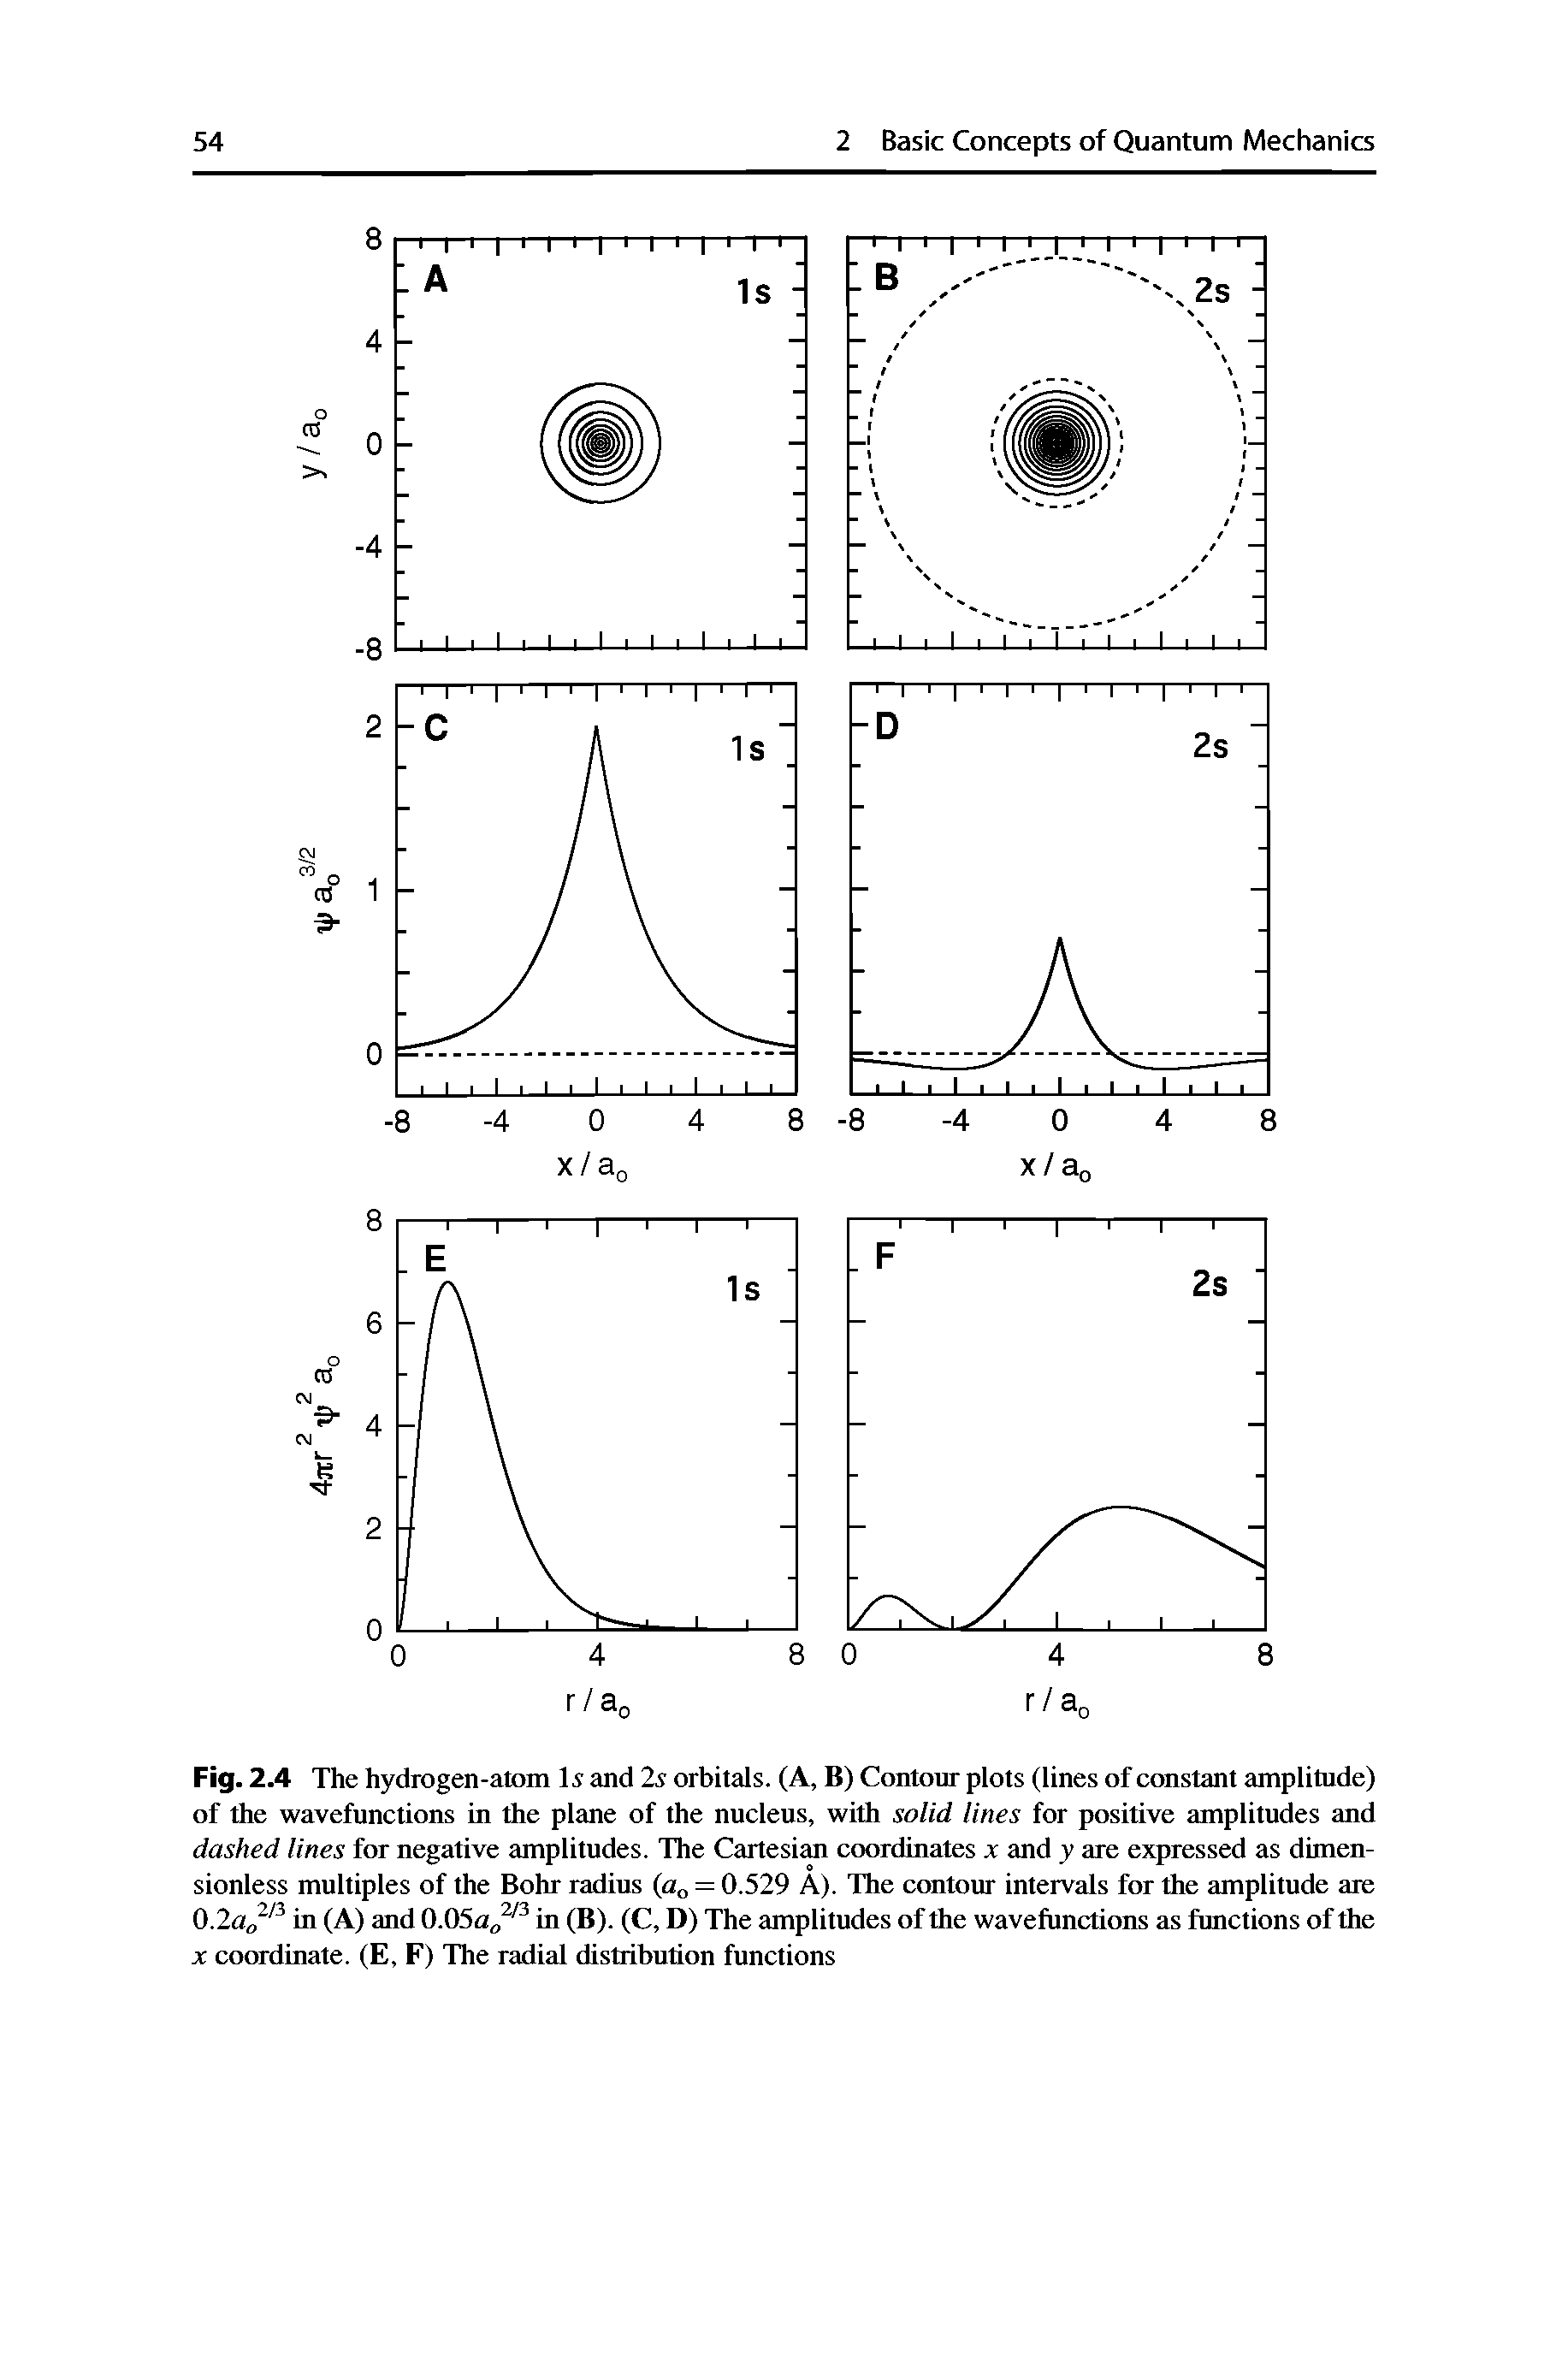 Fig. 2.4 The hydrogen-atom and 2s orbitals. (A, B) Contour plots (lines of constant amplitude) of the wavefunctions in the plane of the nucleus, with so/id lines for positive amplitudes and dashed lines for negative amplitudes. The Cartesian coordinates x and y are expressed as dimensionless multiples of the Bohr radius (Aq = 0.529 A). The contour intervals for the amplitude are in (A) and 0.05a<, in (B). (C, D) The amplitudes of the wavefunctions as functions of the X coordinate. (E, F) The radial distribution functions...